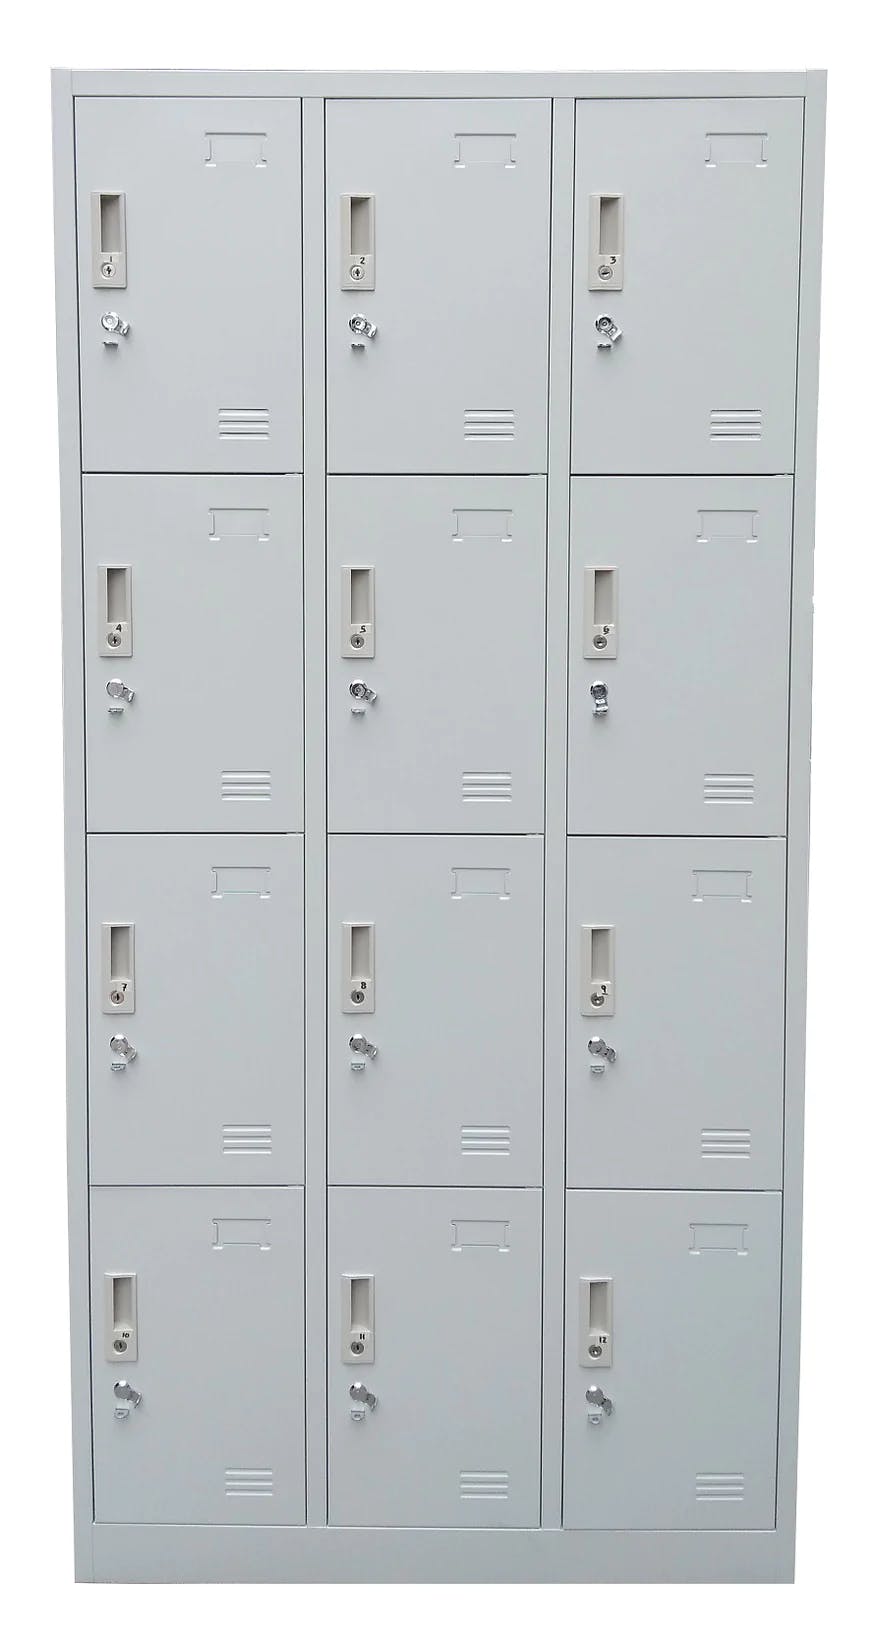 Cubix Steel Locker Cabinet with Padlock Hasp and Name Plate